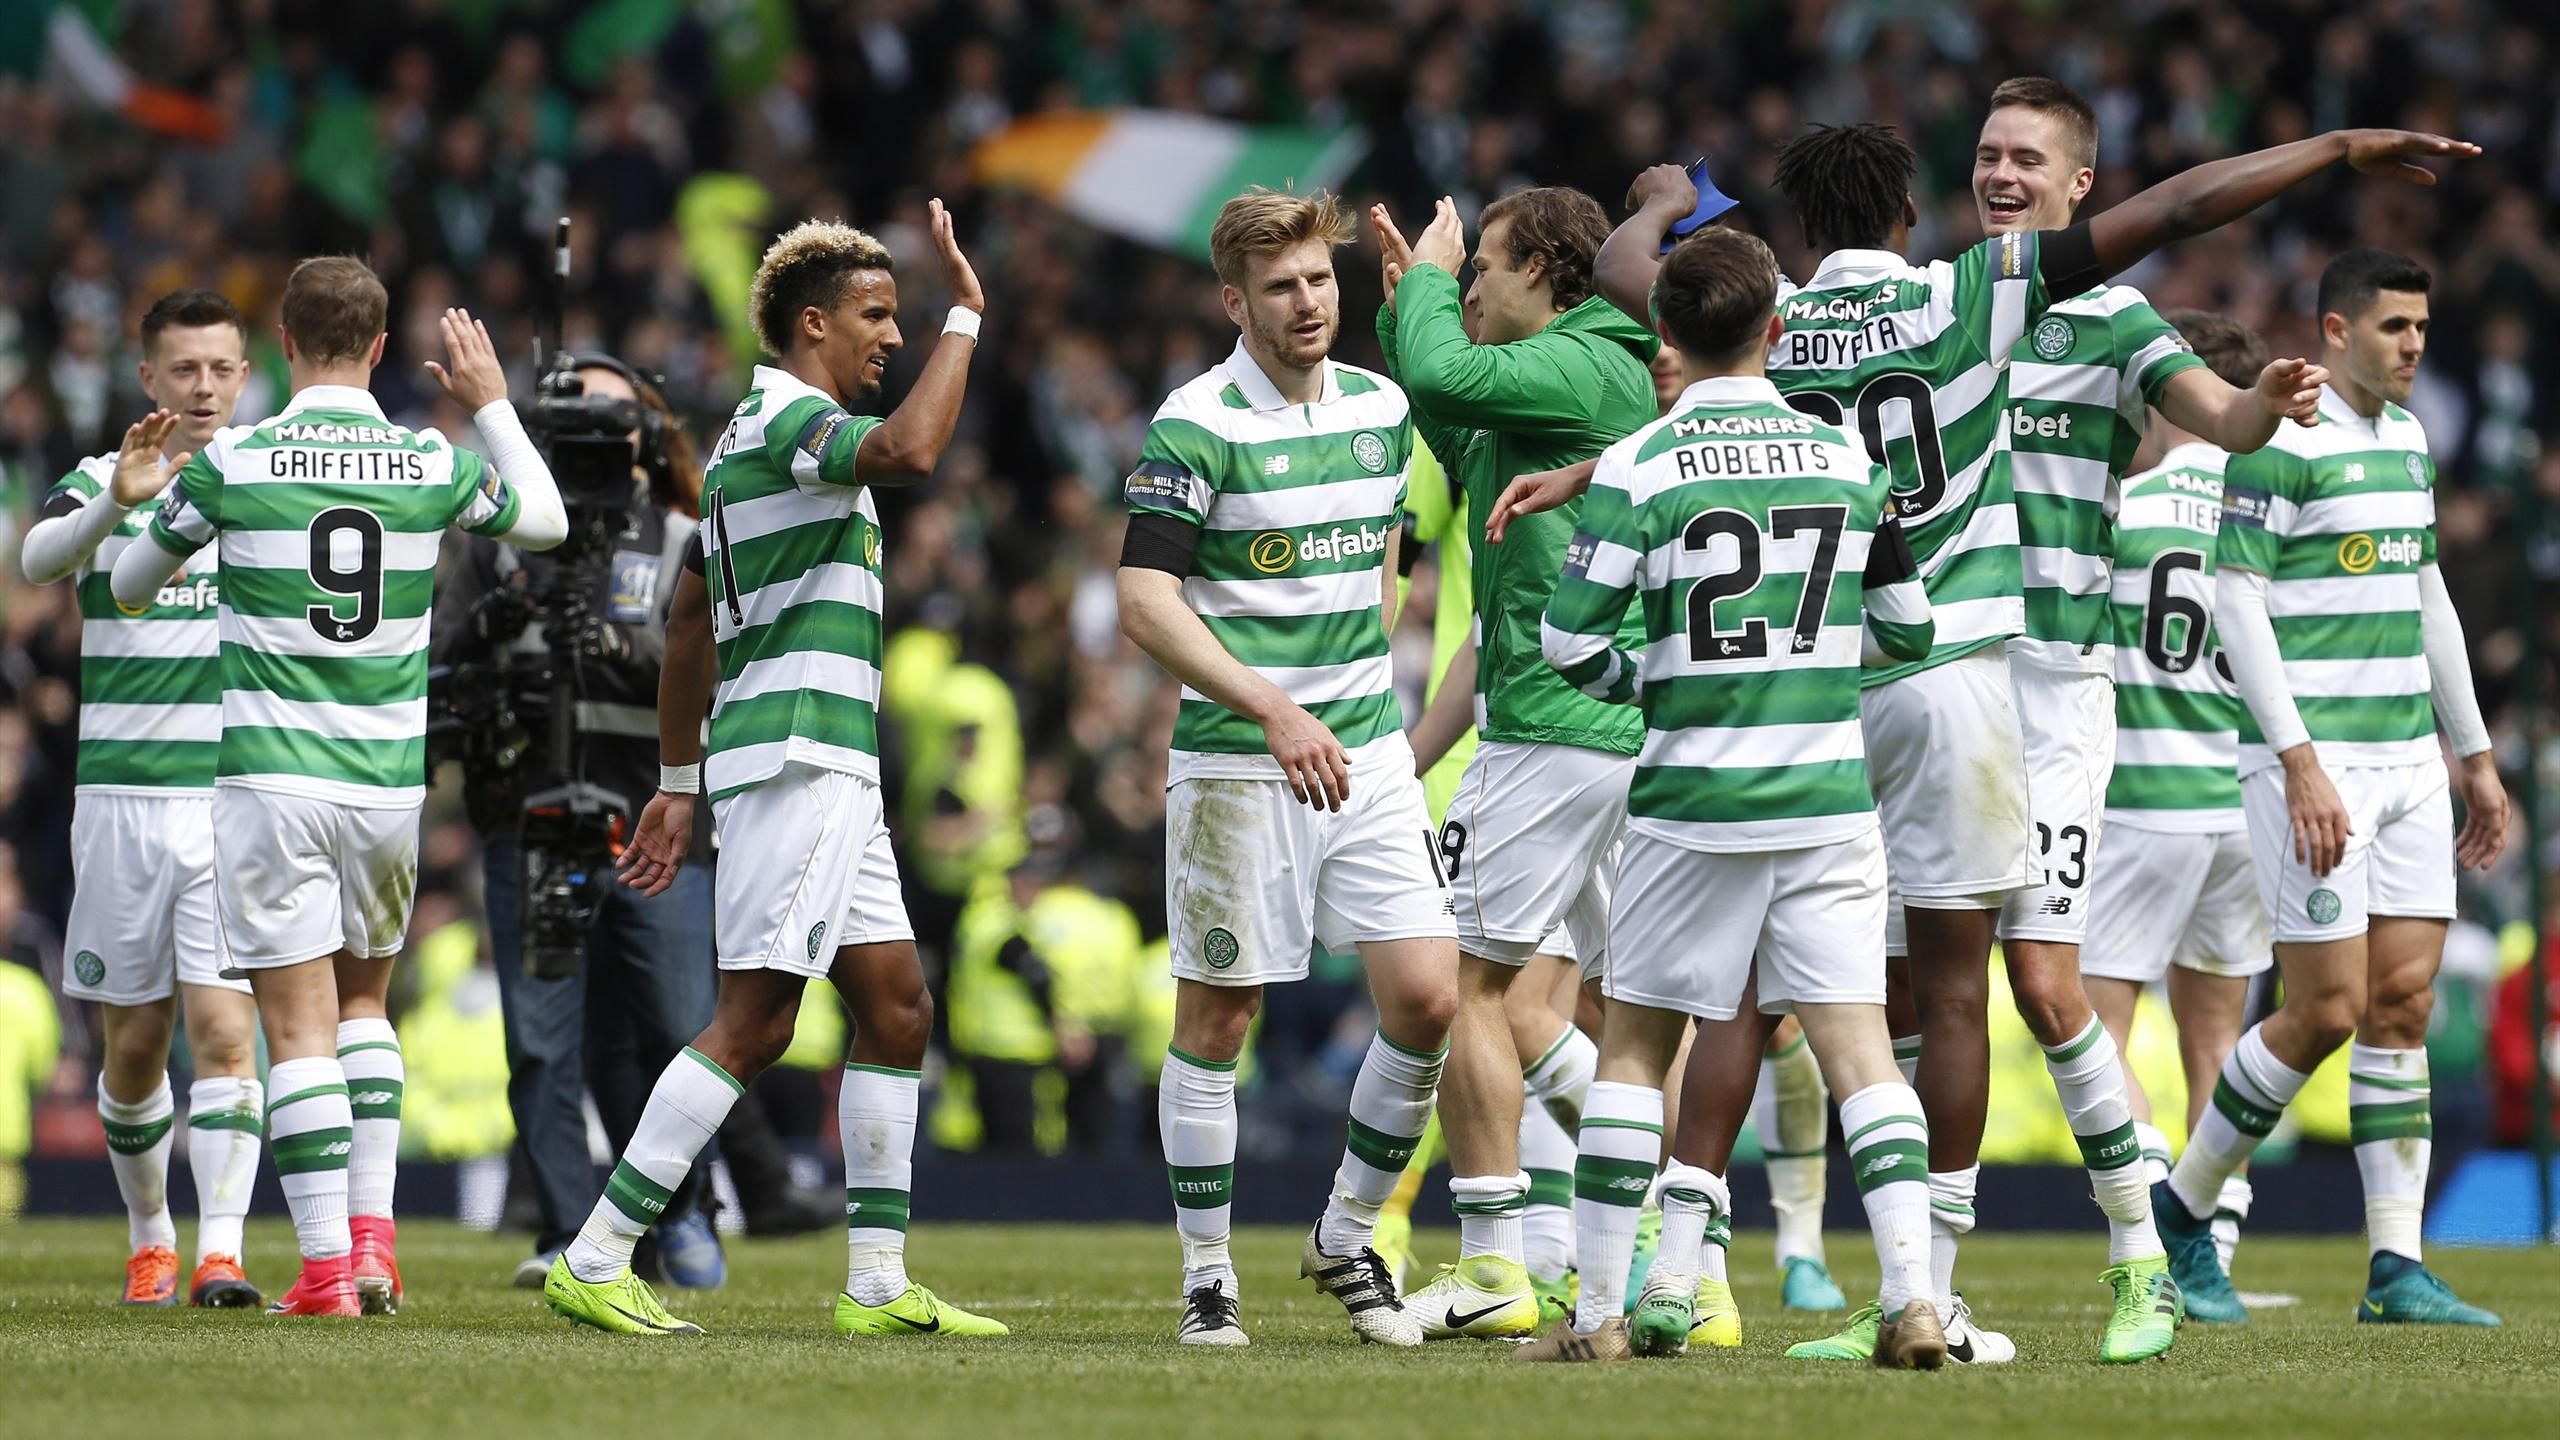 Celtic seal historic Treble with Scottish Cup final victory over